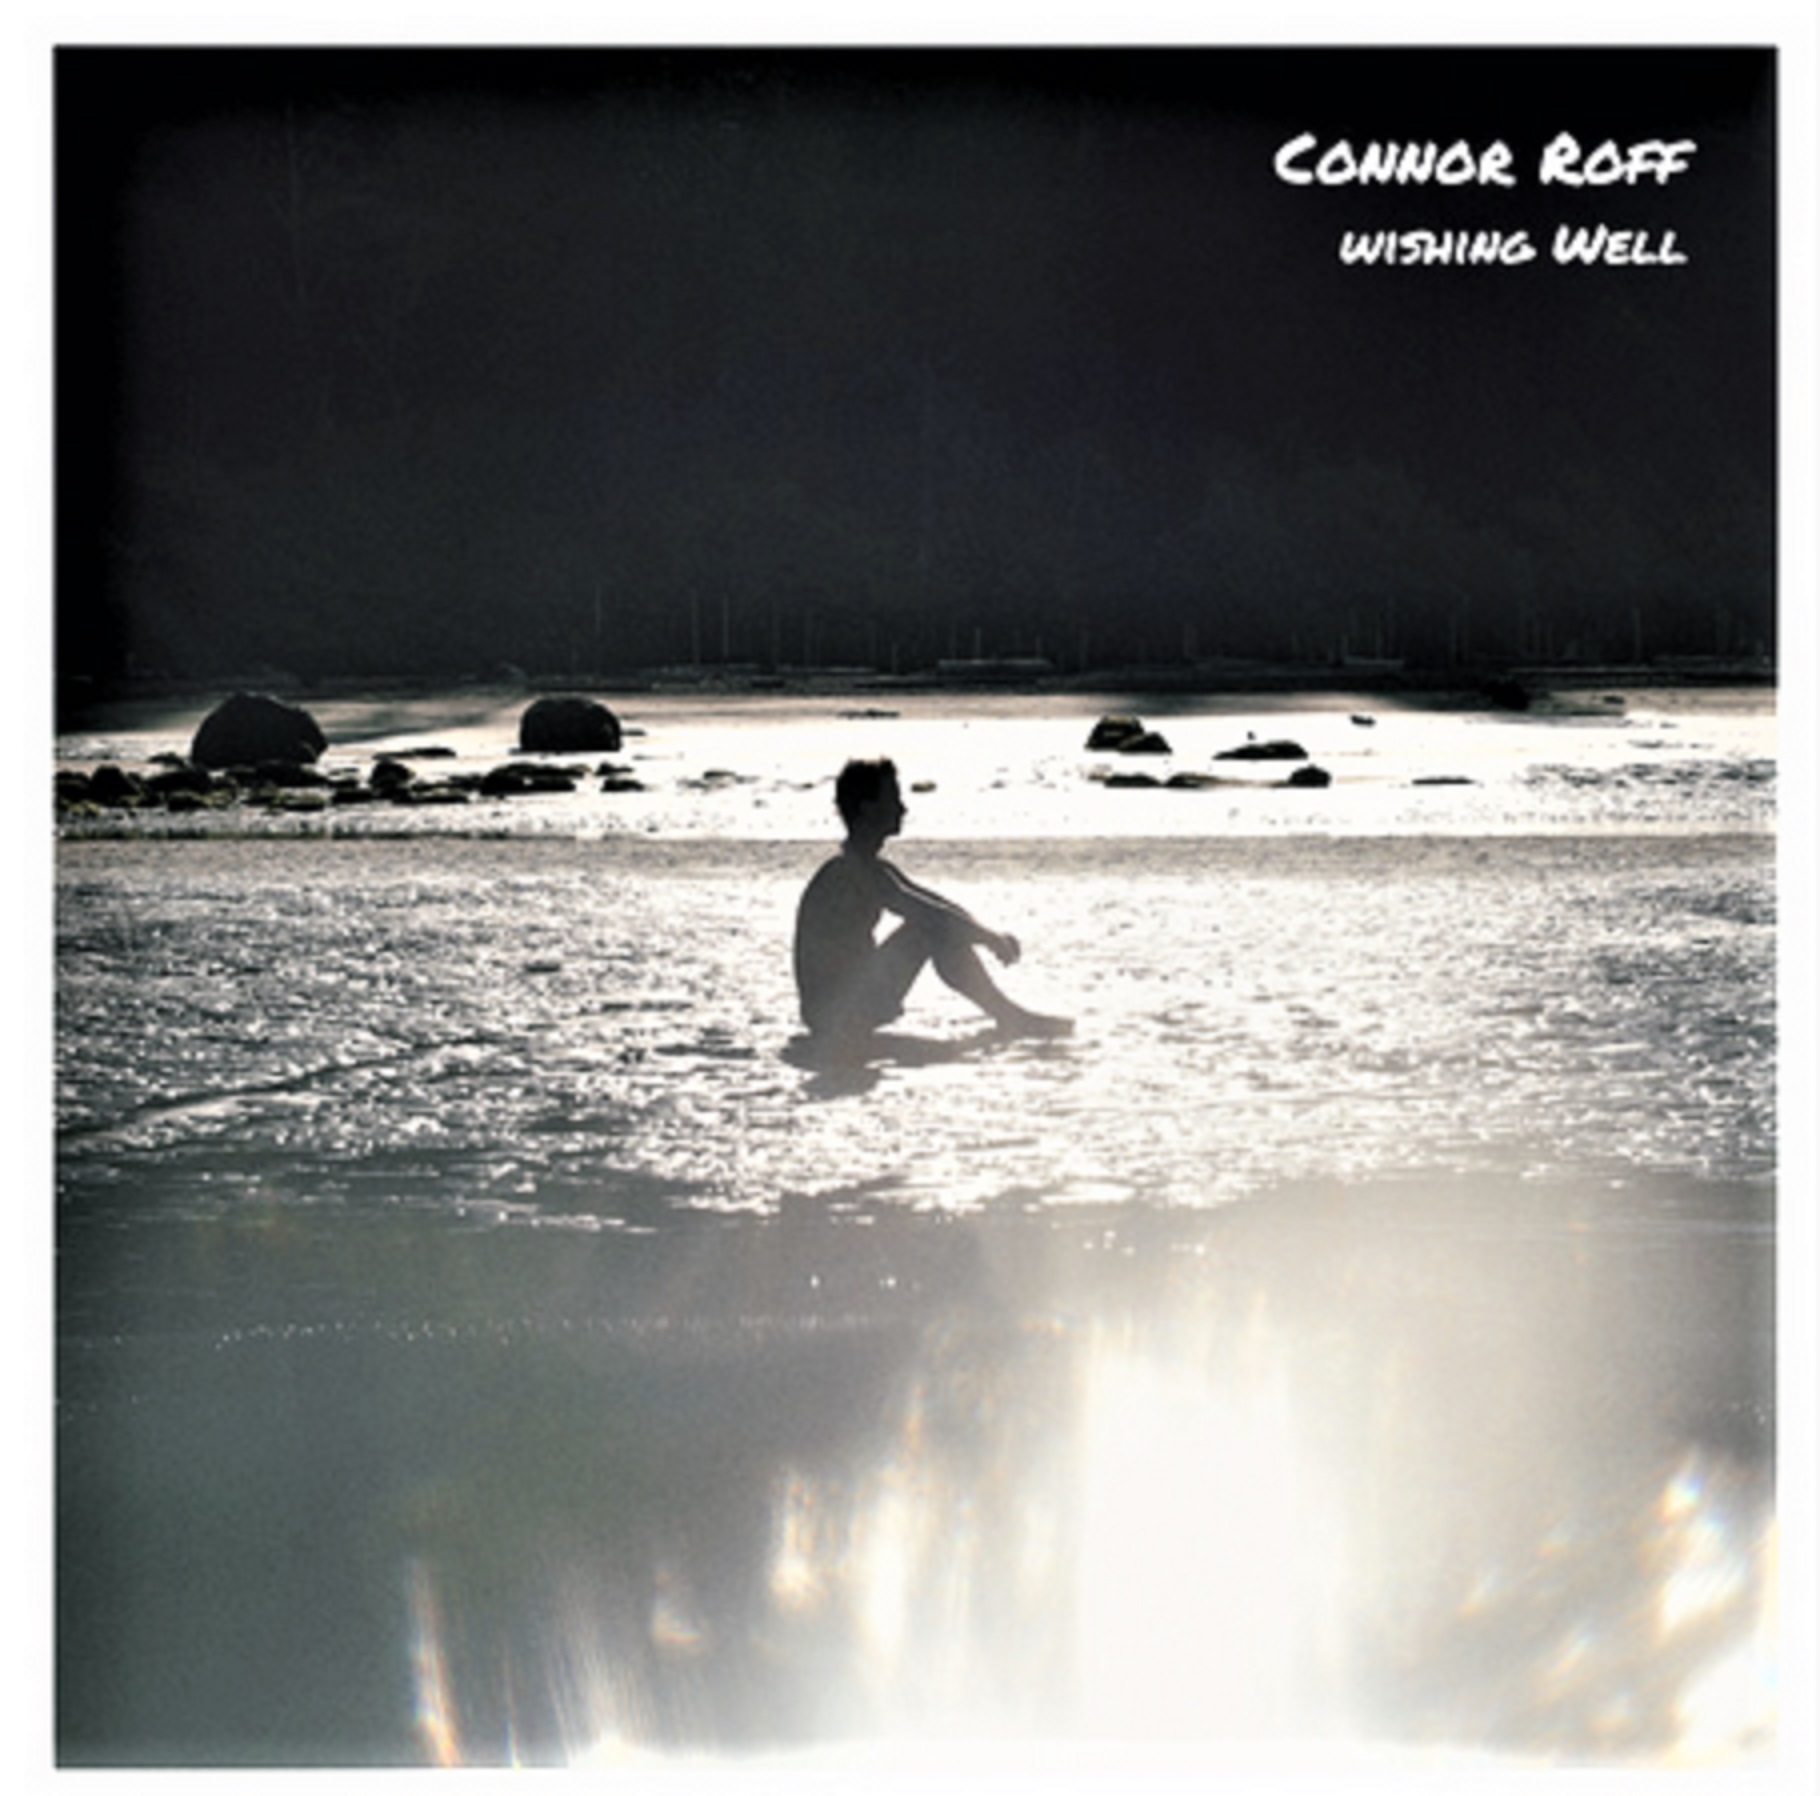 Connor Roff | “Wishing Well” | Review